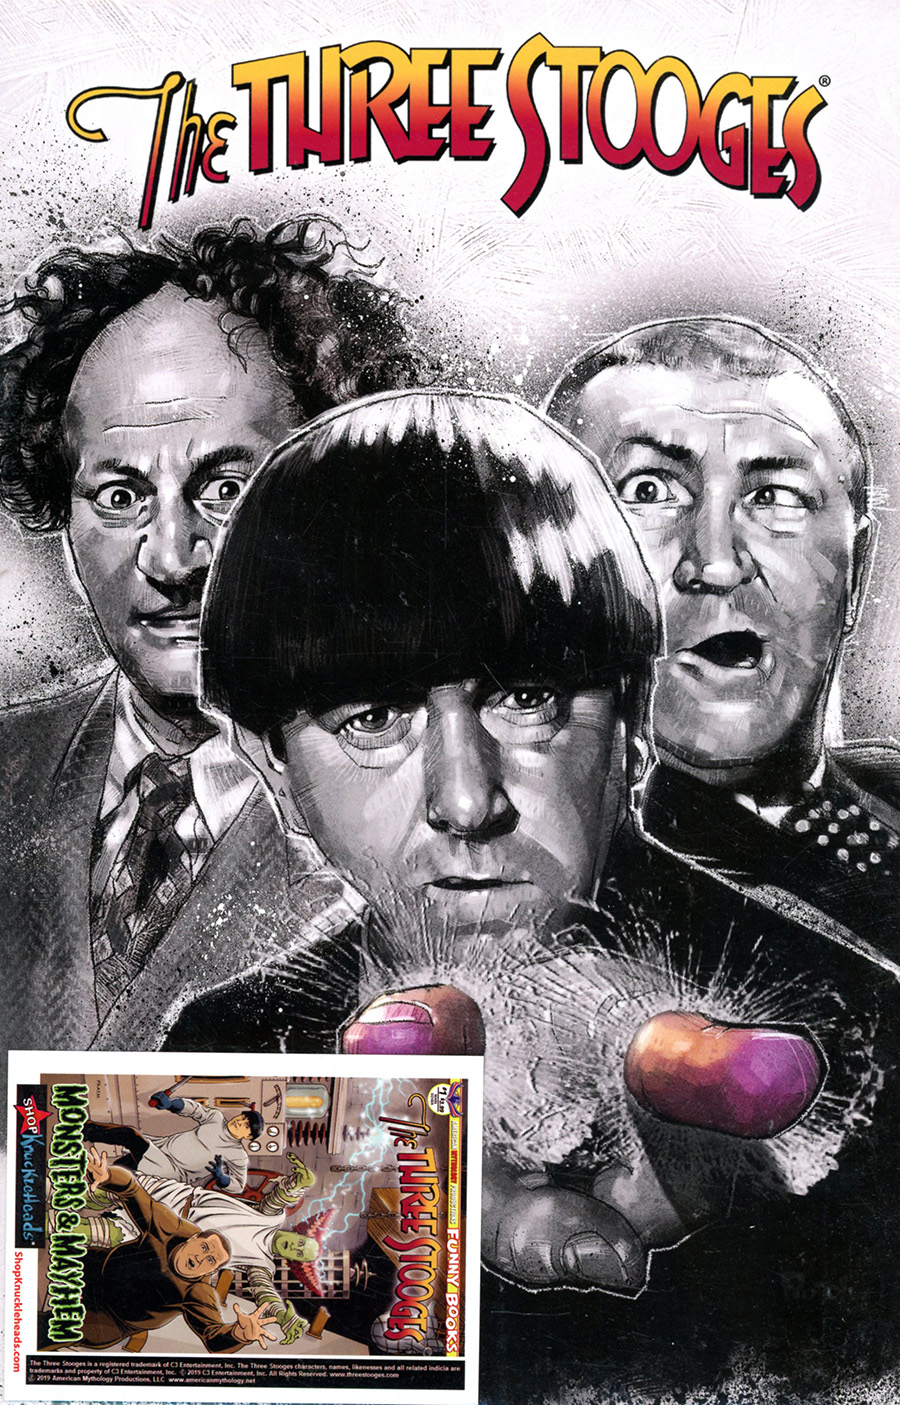 Three Stooges Vol 1 TP With Promo Card